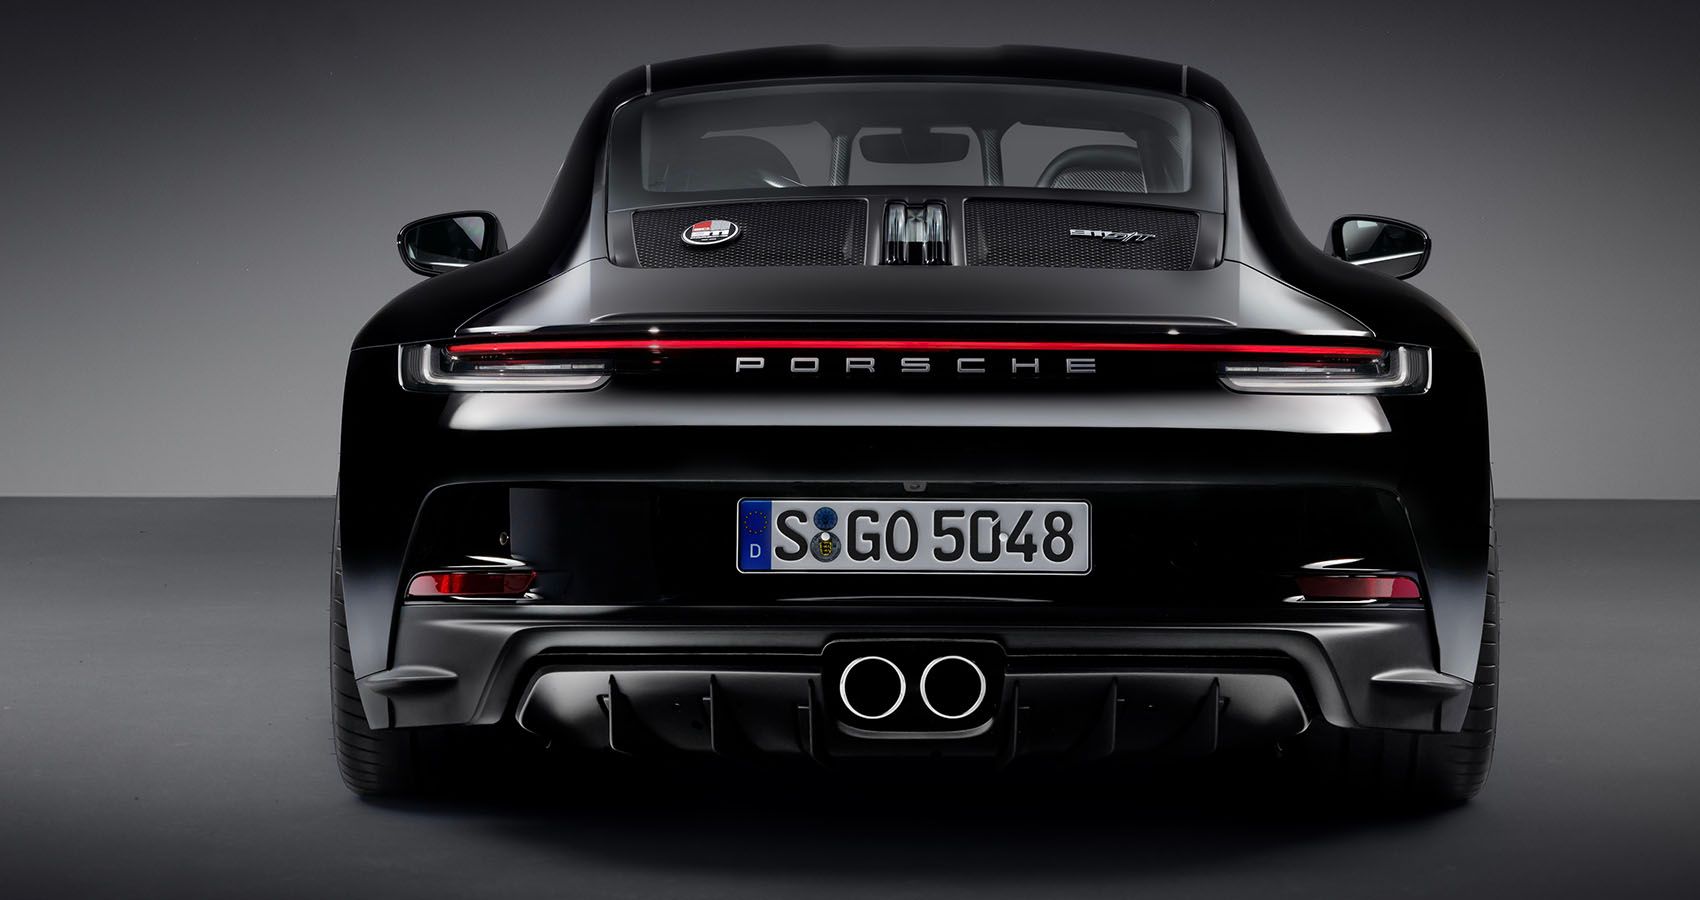 10 Features That Make The Porsche 911 S/T The Ultimate Road Car